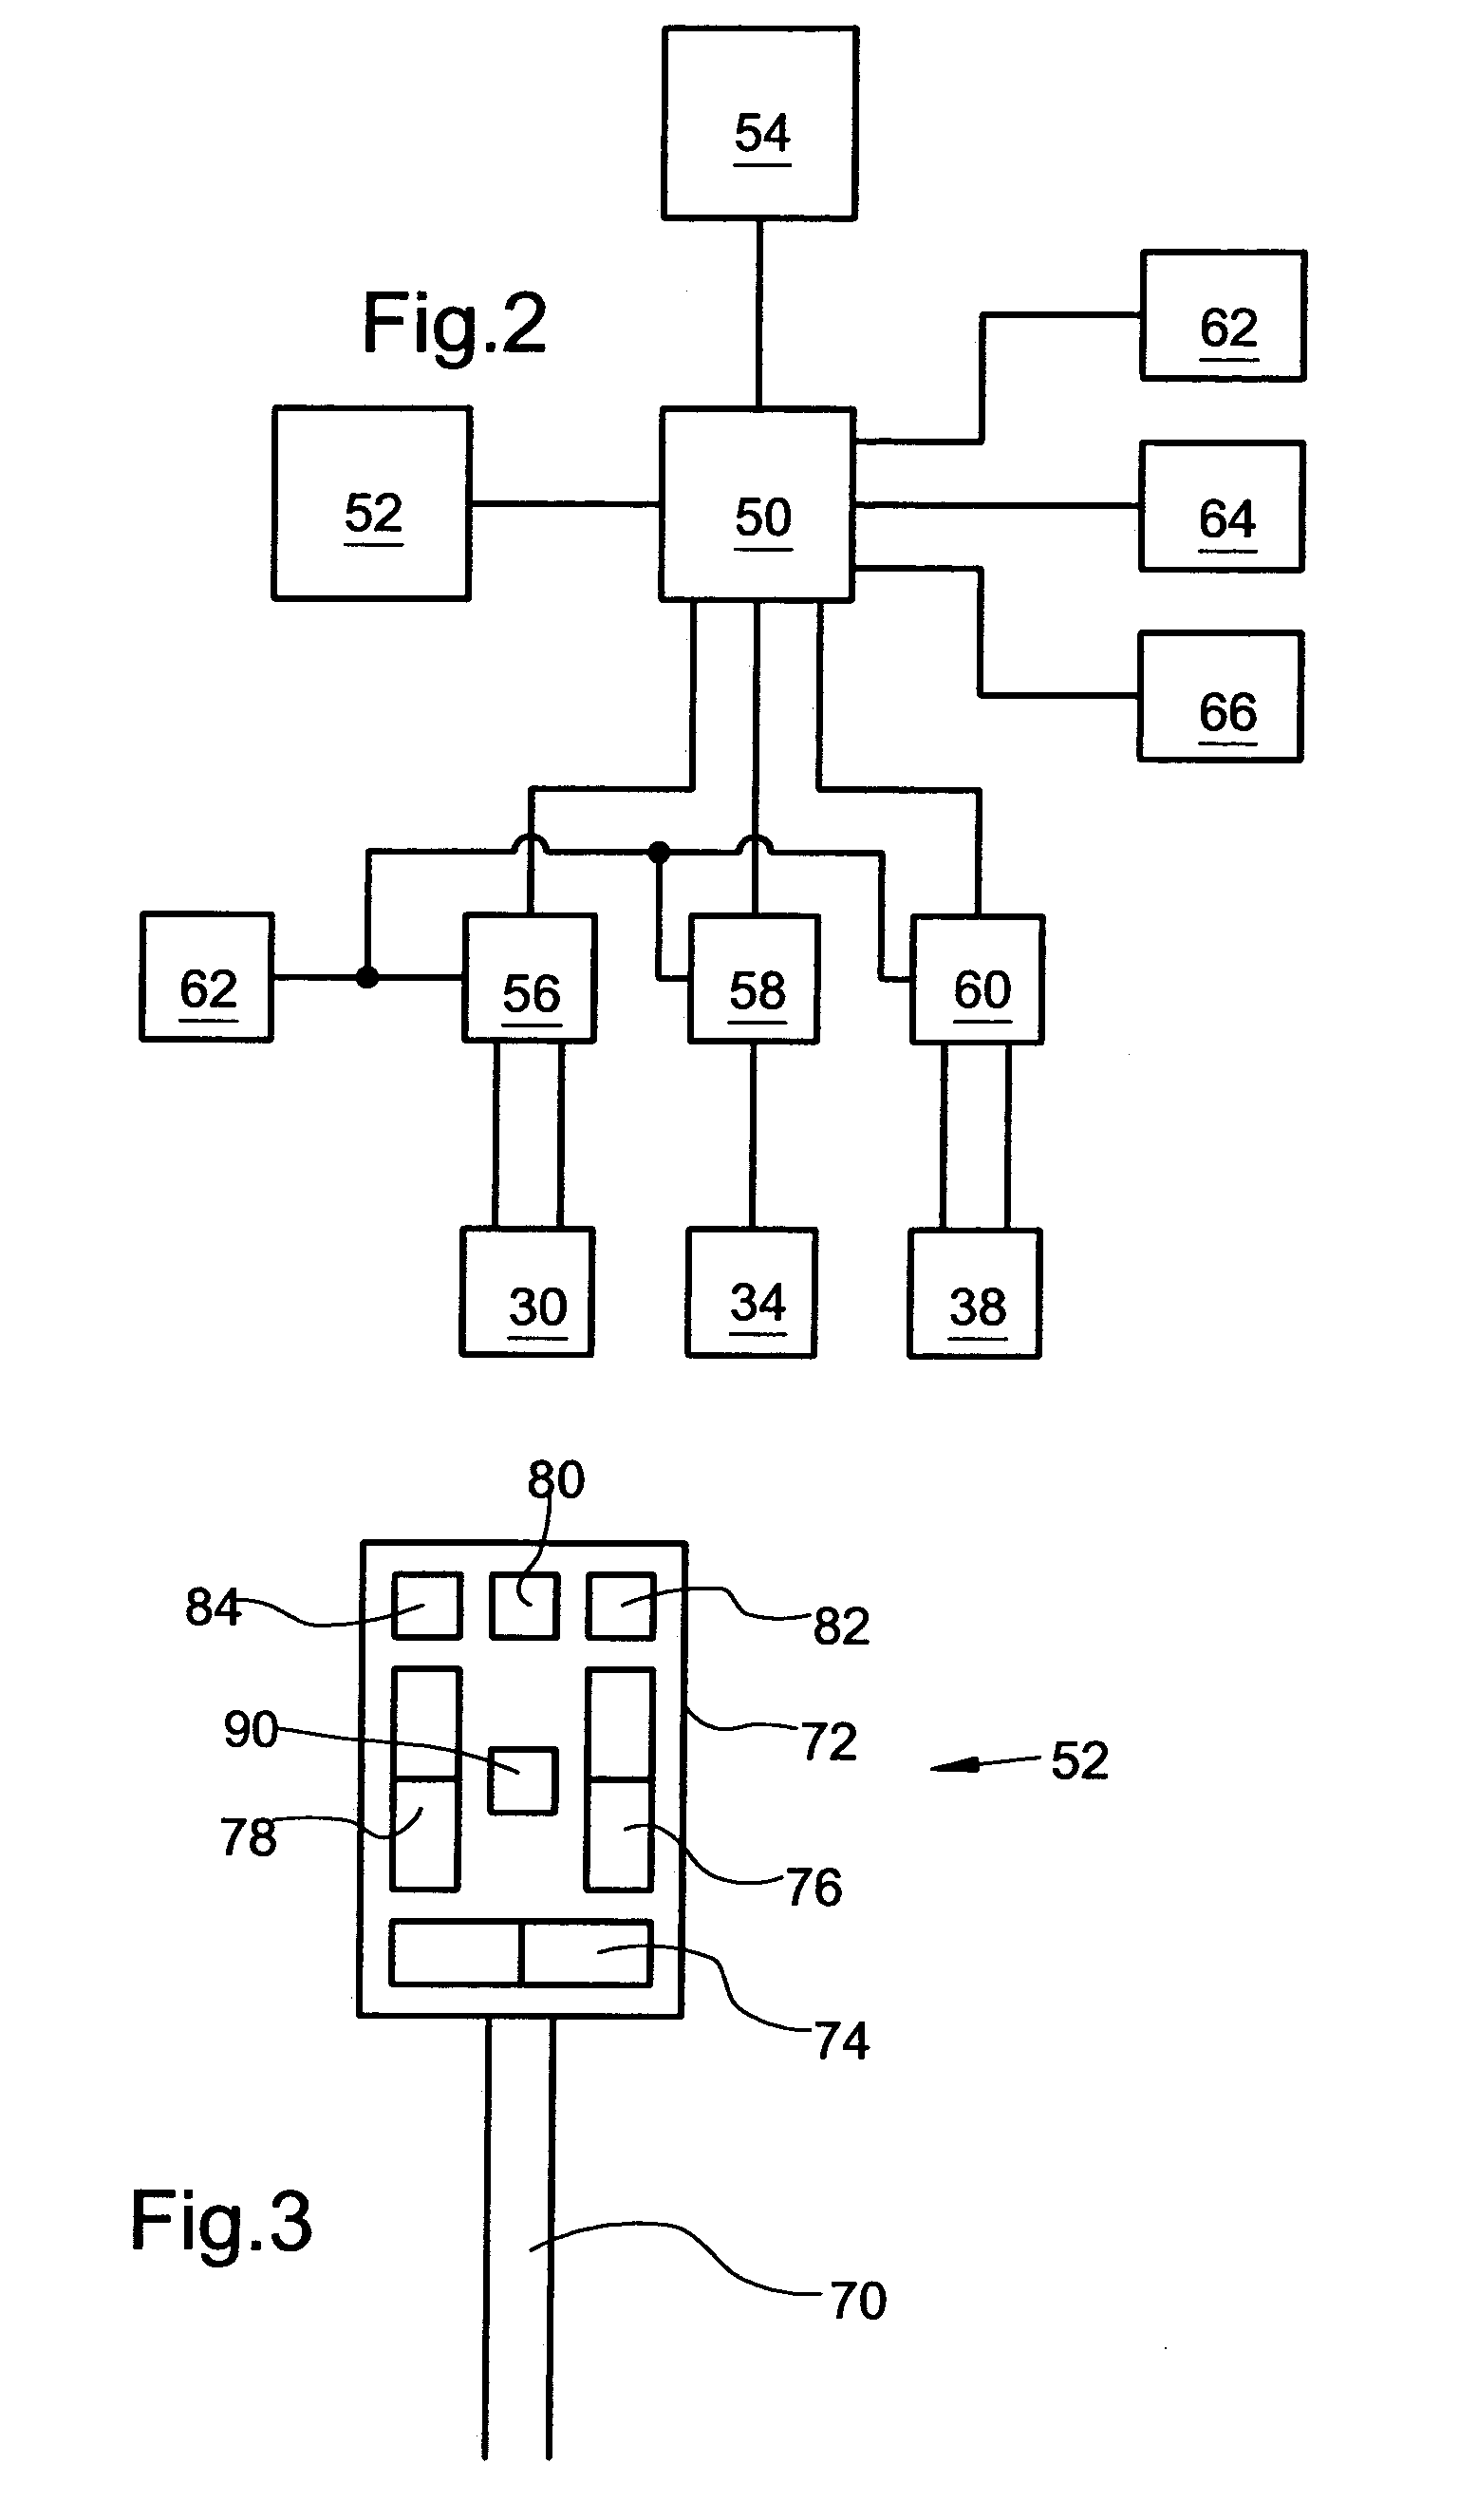 Control arrangement for crop discharging device of an agricultural harvesting machine